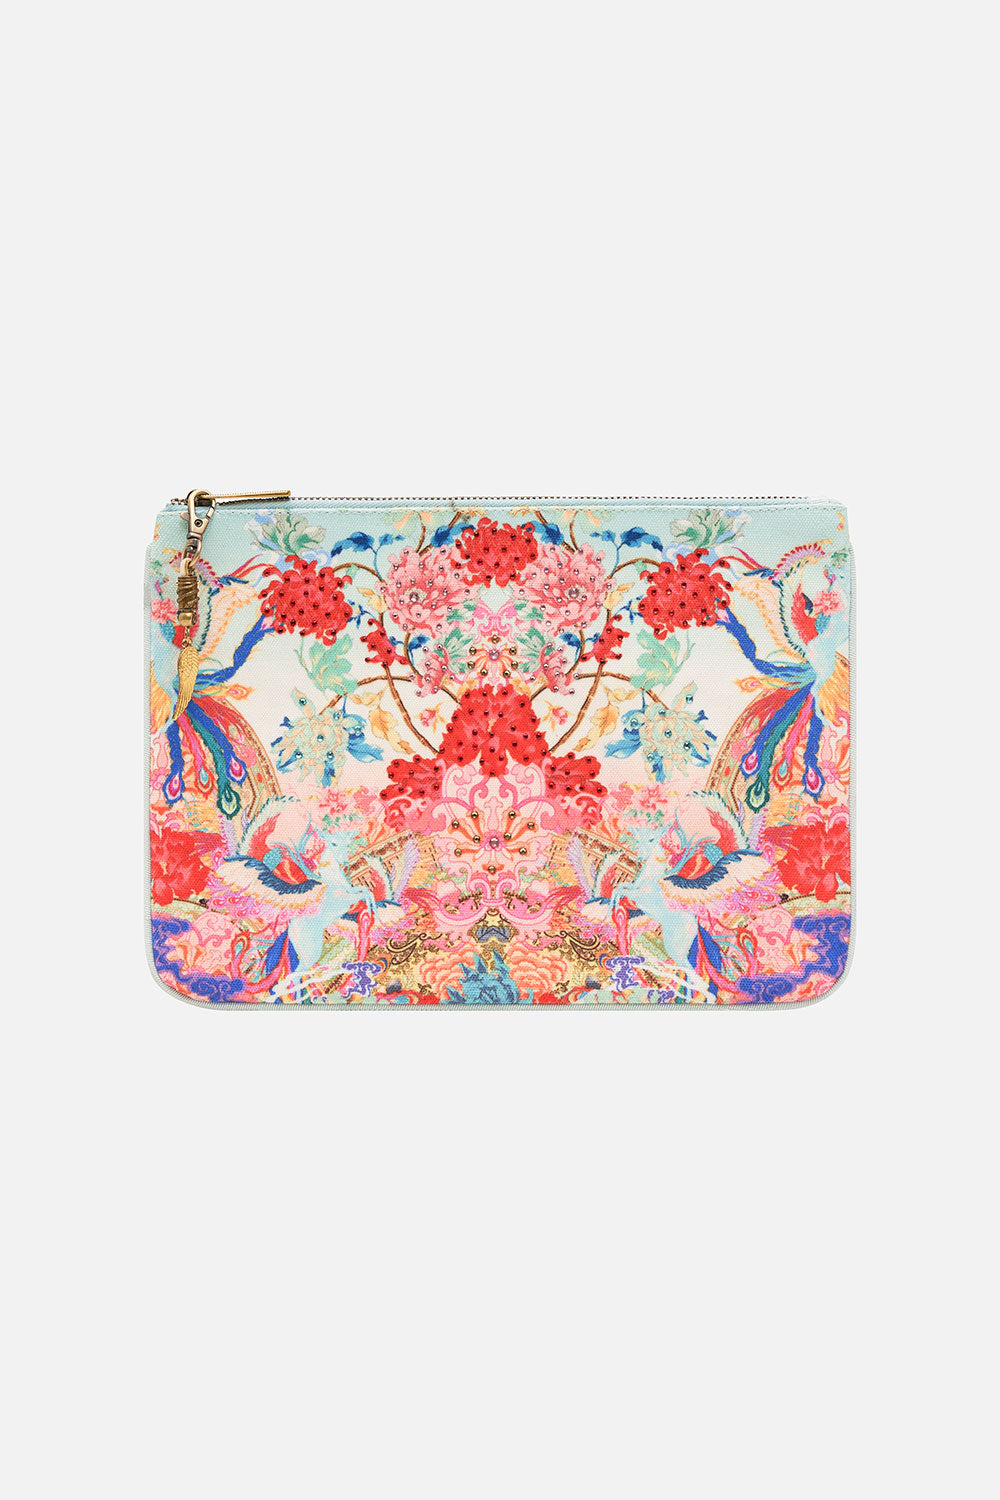 SMALL CANVAS CLUTCH GO STAG